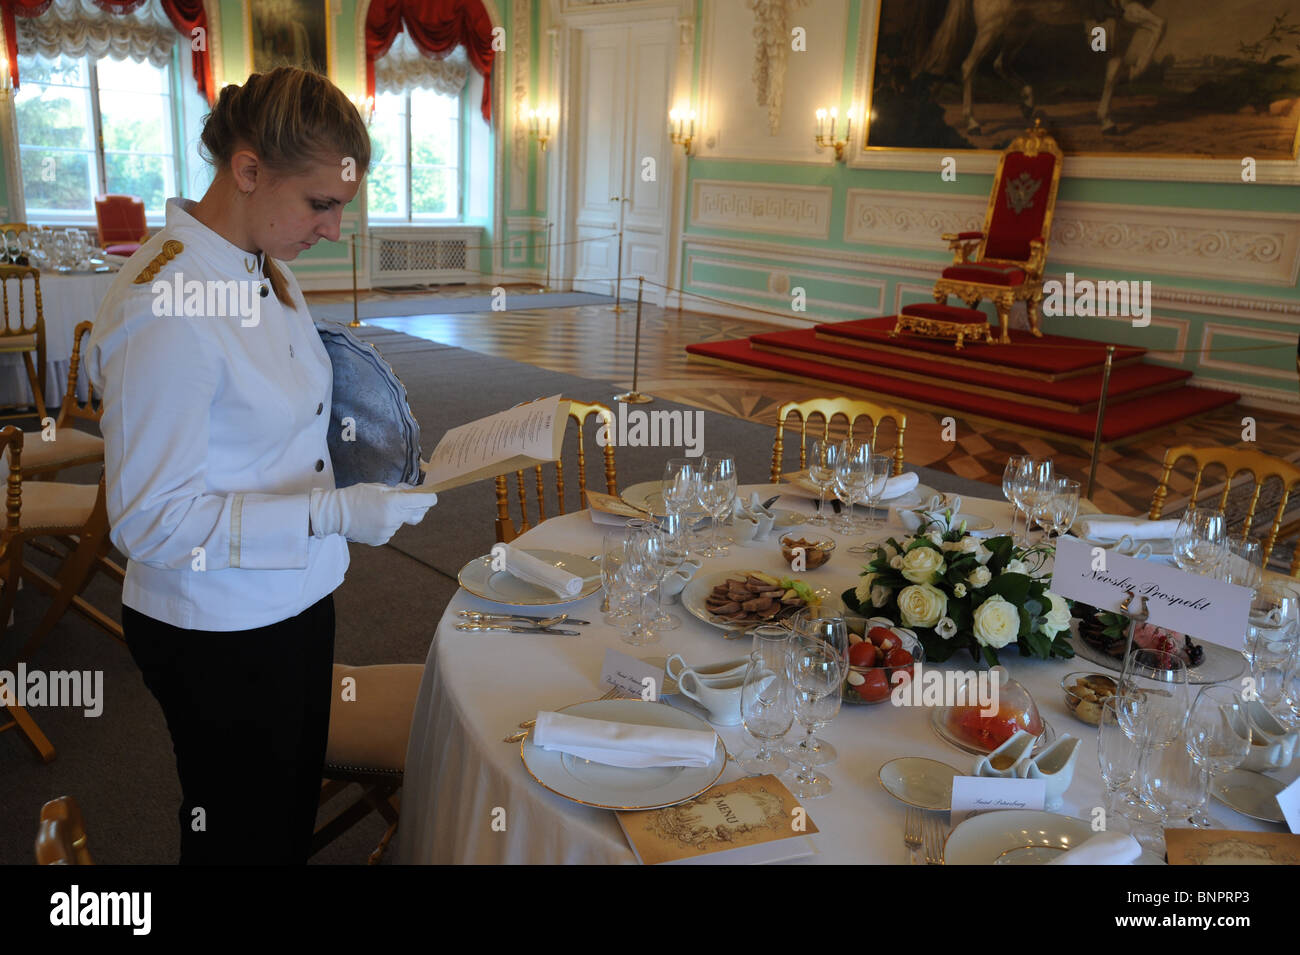 Preparations for a gala dinner at the Peterhof Palace, Saint Petersburg, Russia Stock Photo